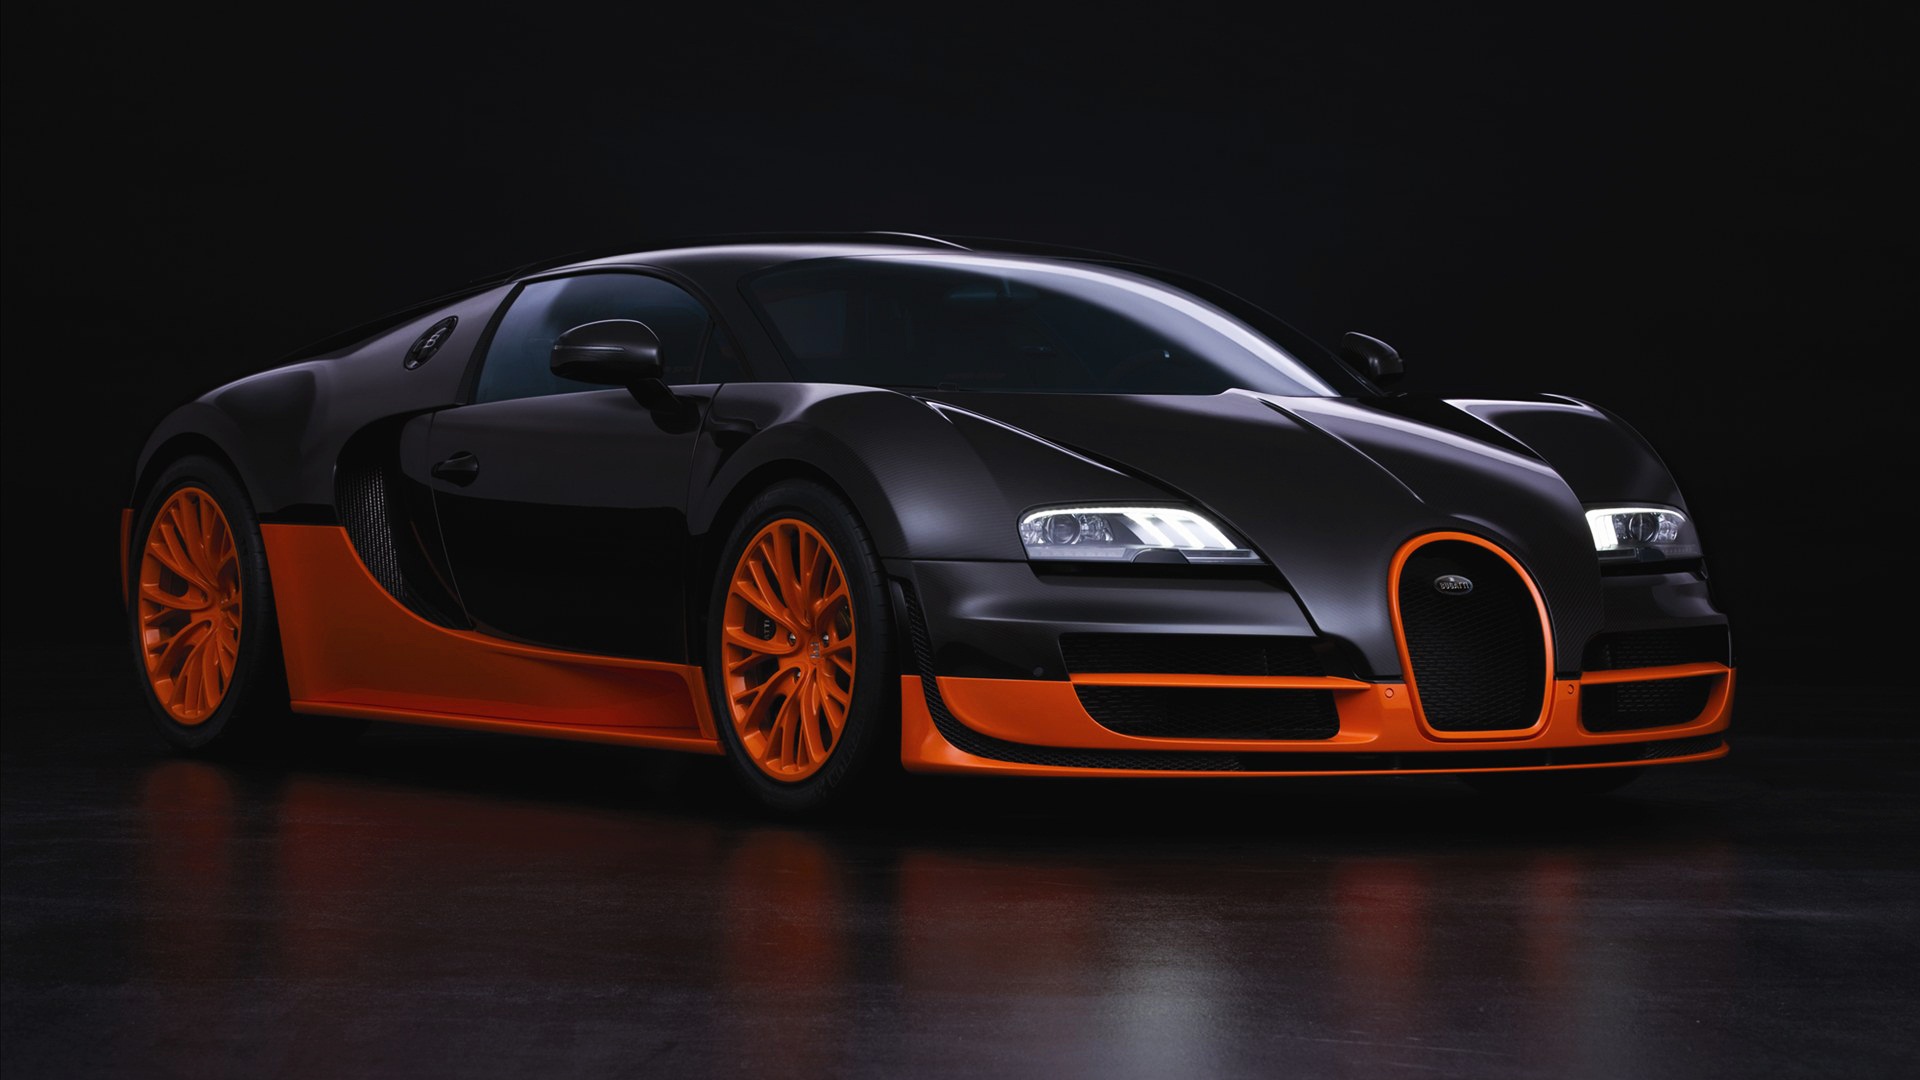 1080x1920 / 1080x1920 bugatti veyron, cars, hd for Iphone 6, 7, 8 wallpaper  - Coolwallpapers.me!